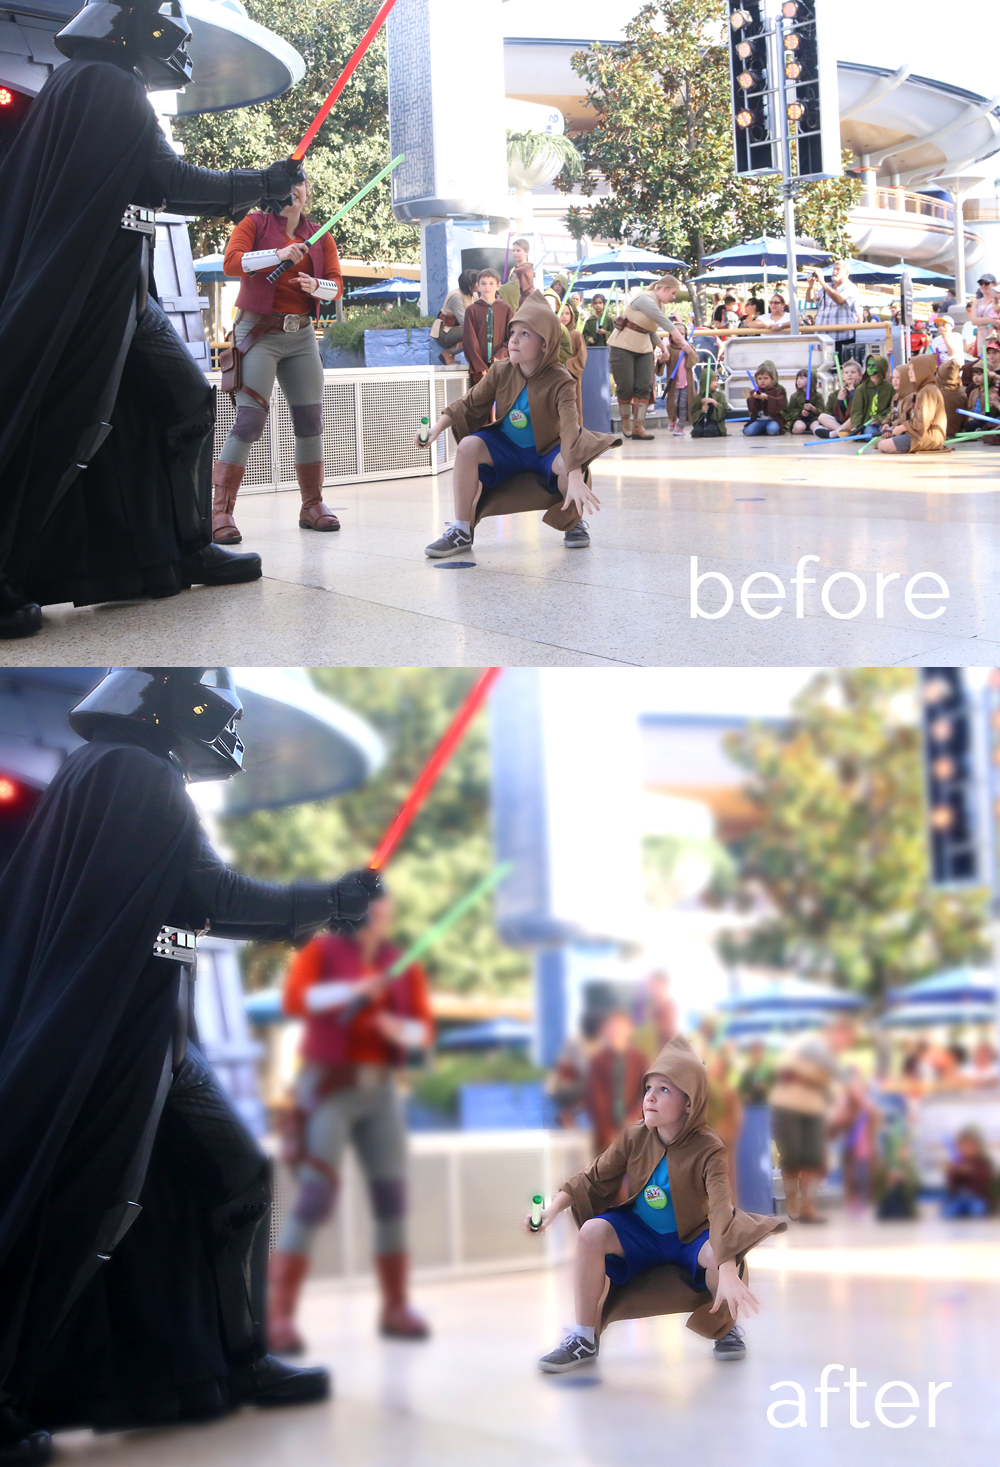 Before and after of a photo of a kid at Disneyland with the background blurred